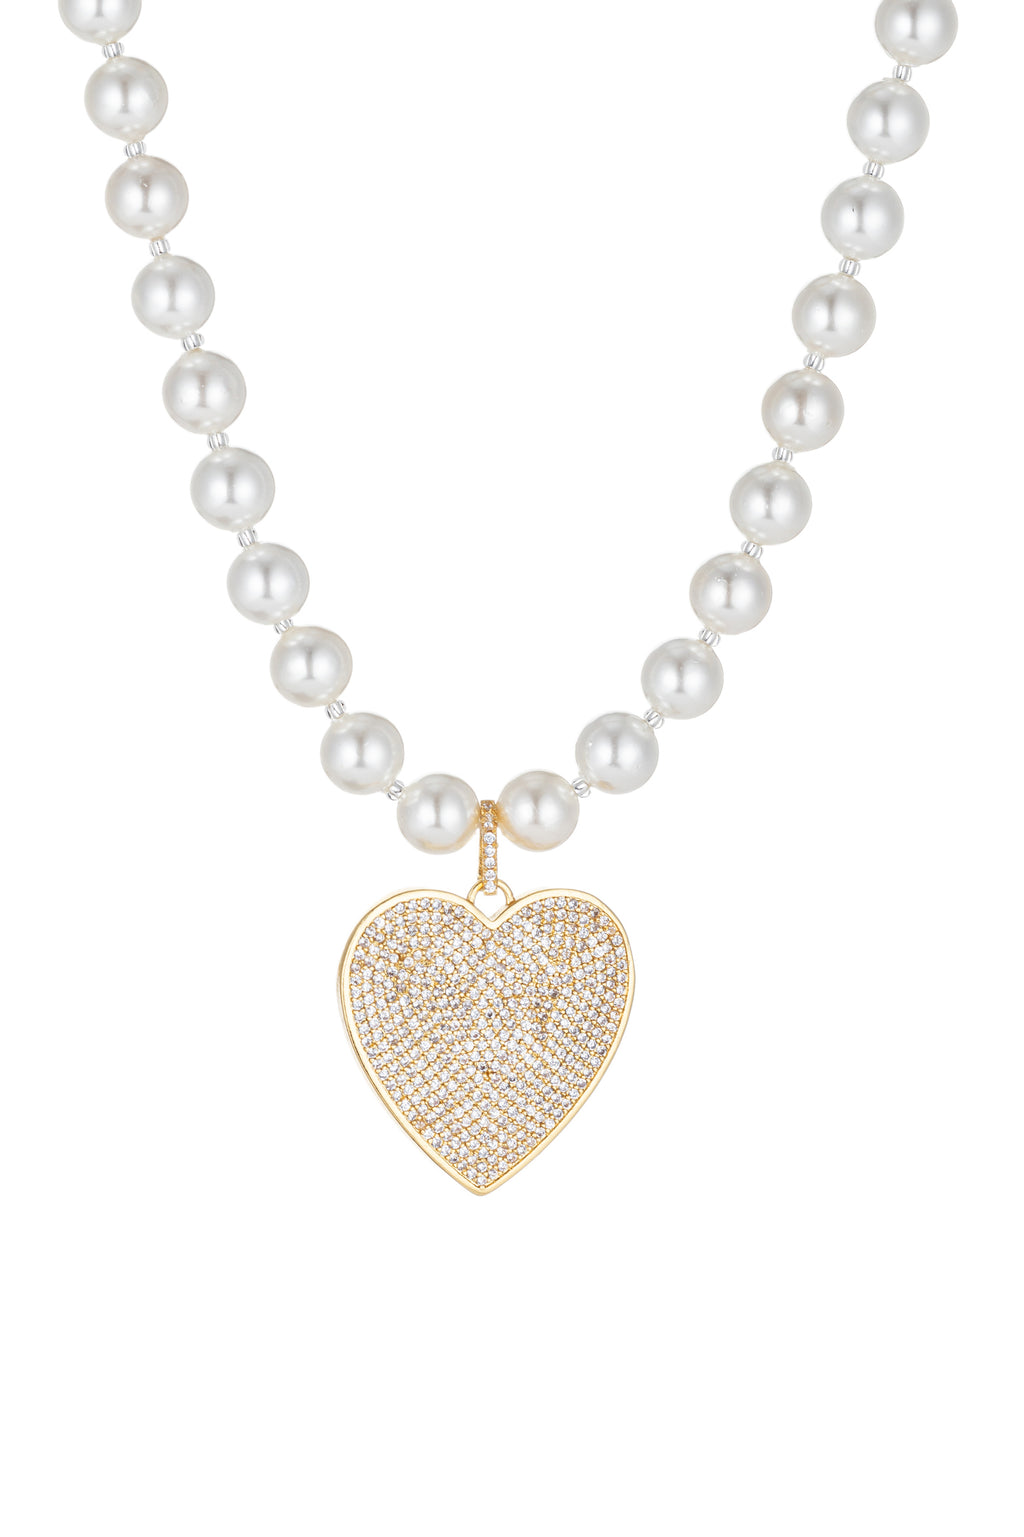 Shell pearl necklace with a heart pendant studded with CZ crystals.